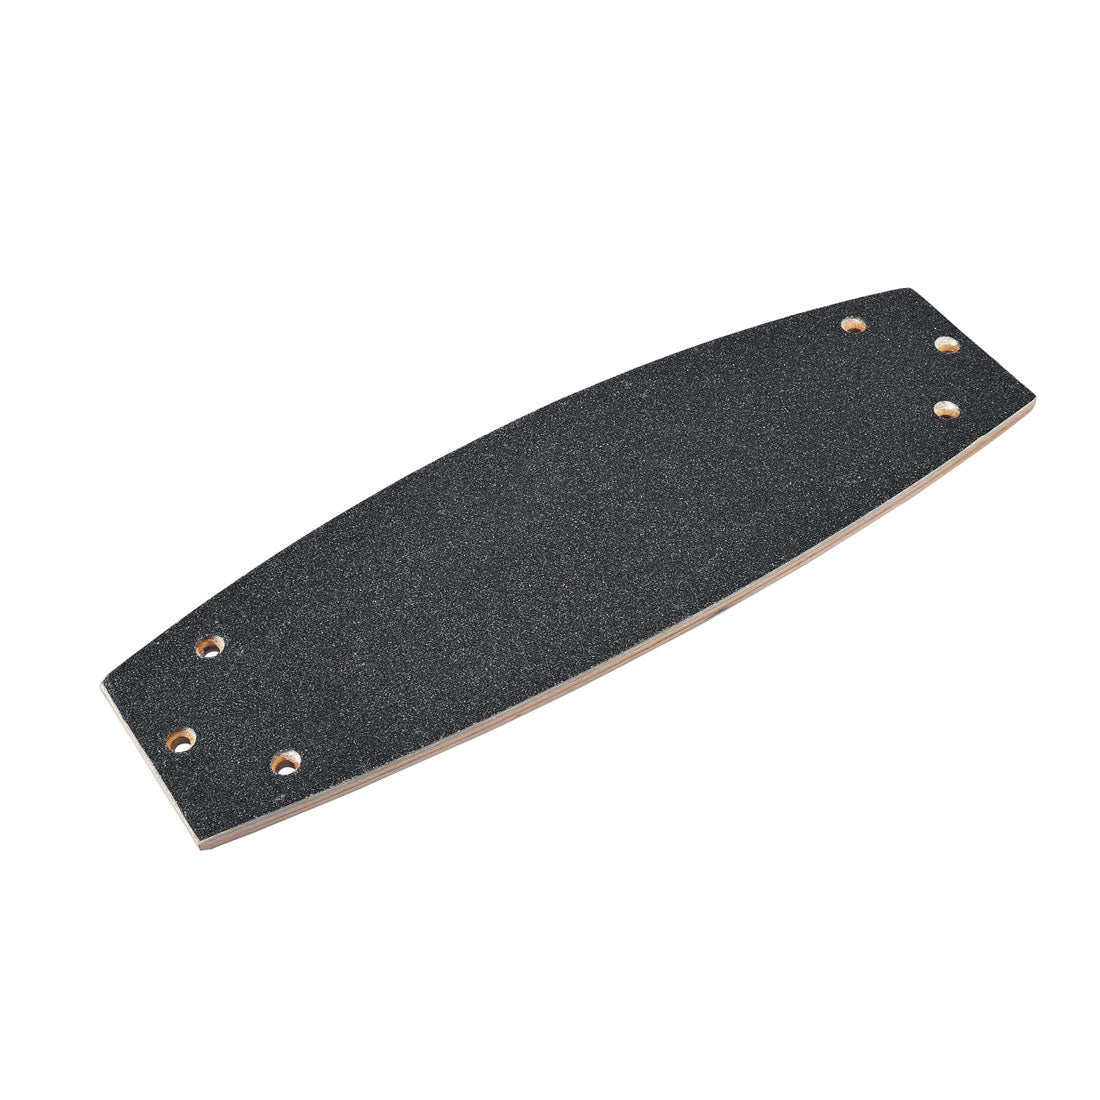 Micro Kickboard Replacement Deck - 1125 Scooter Hardware and Parts